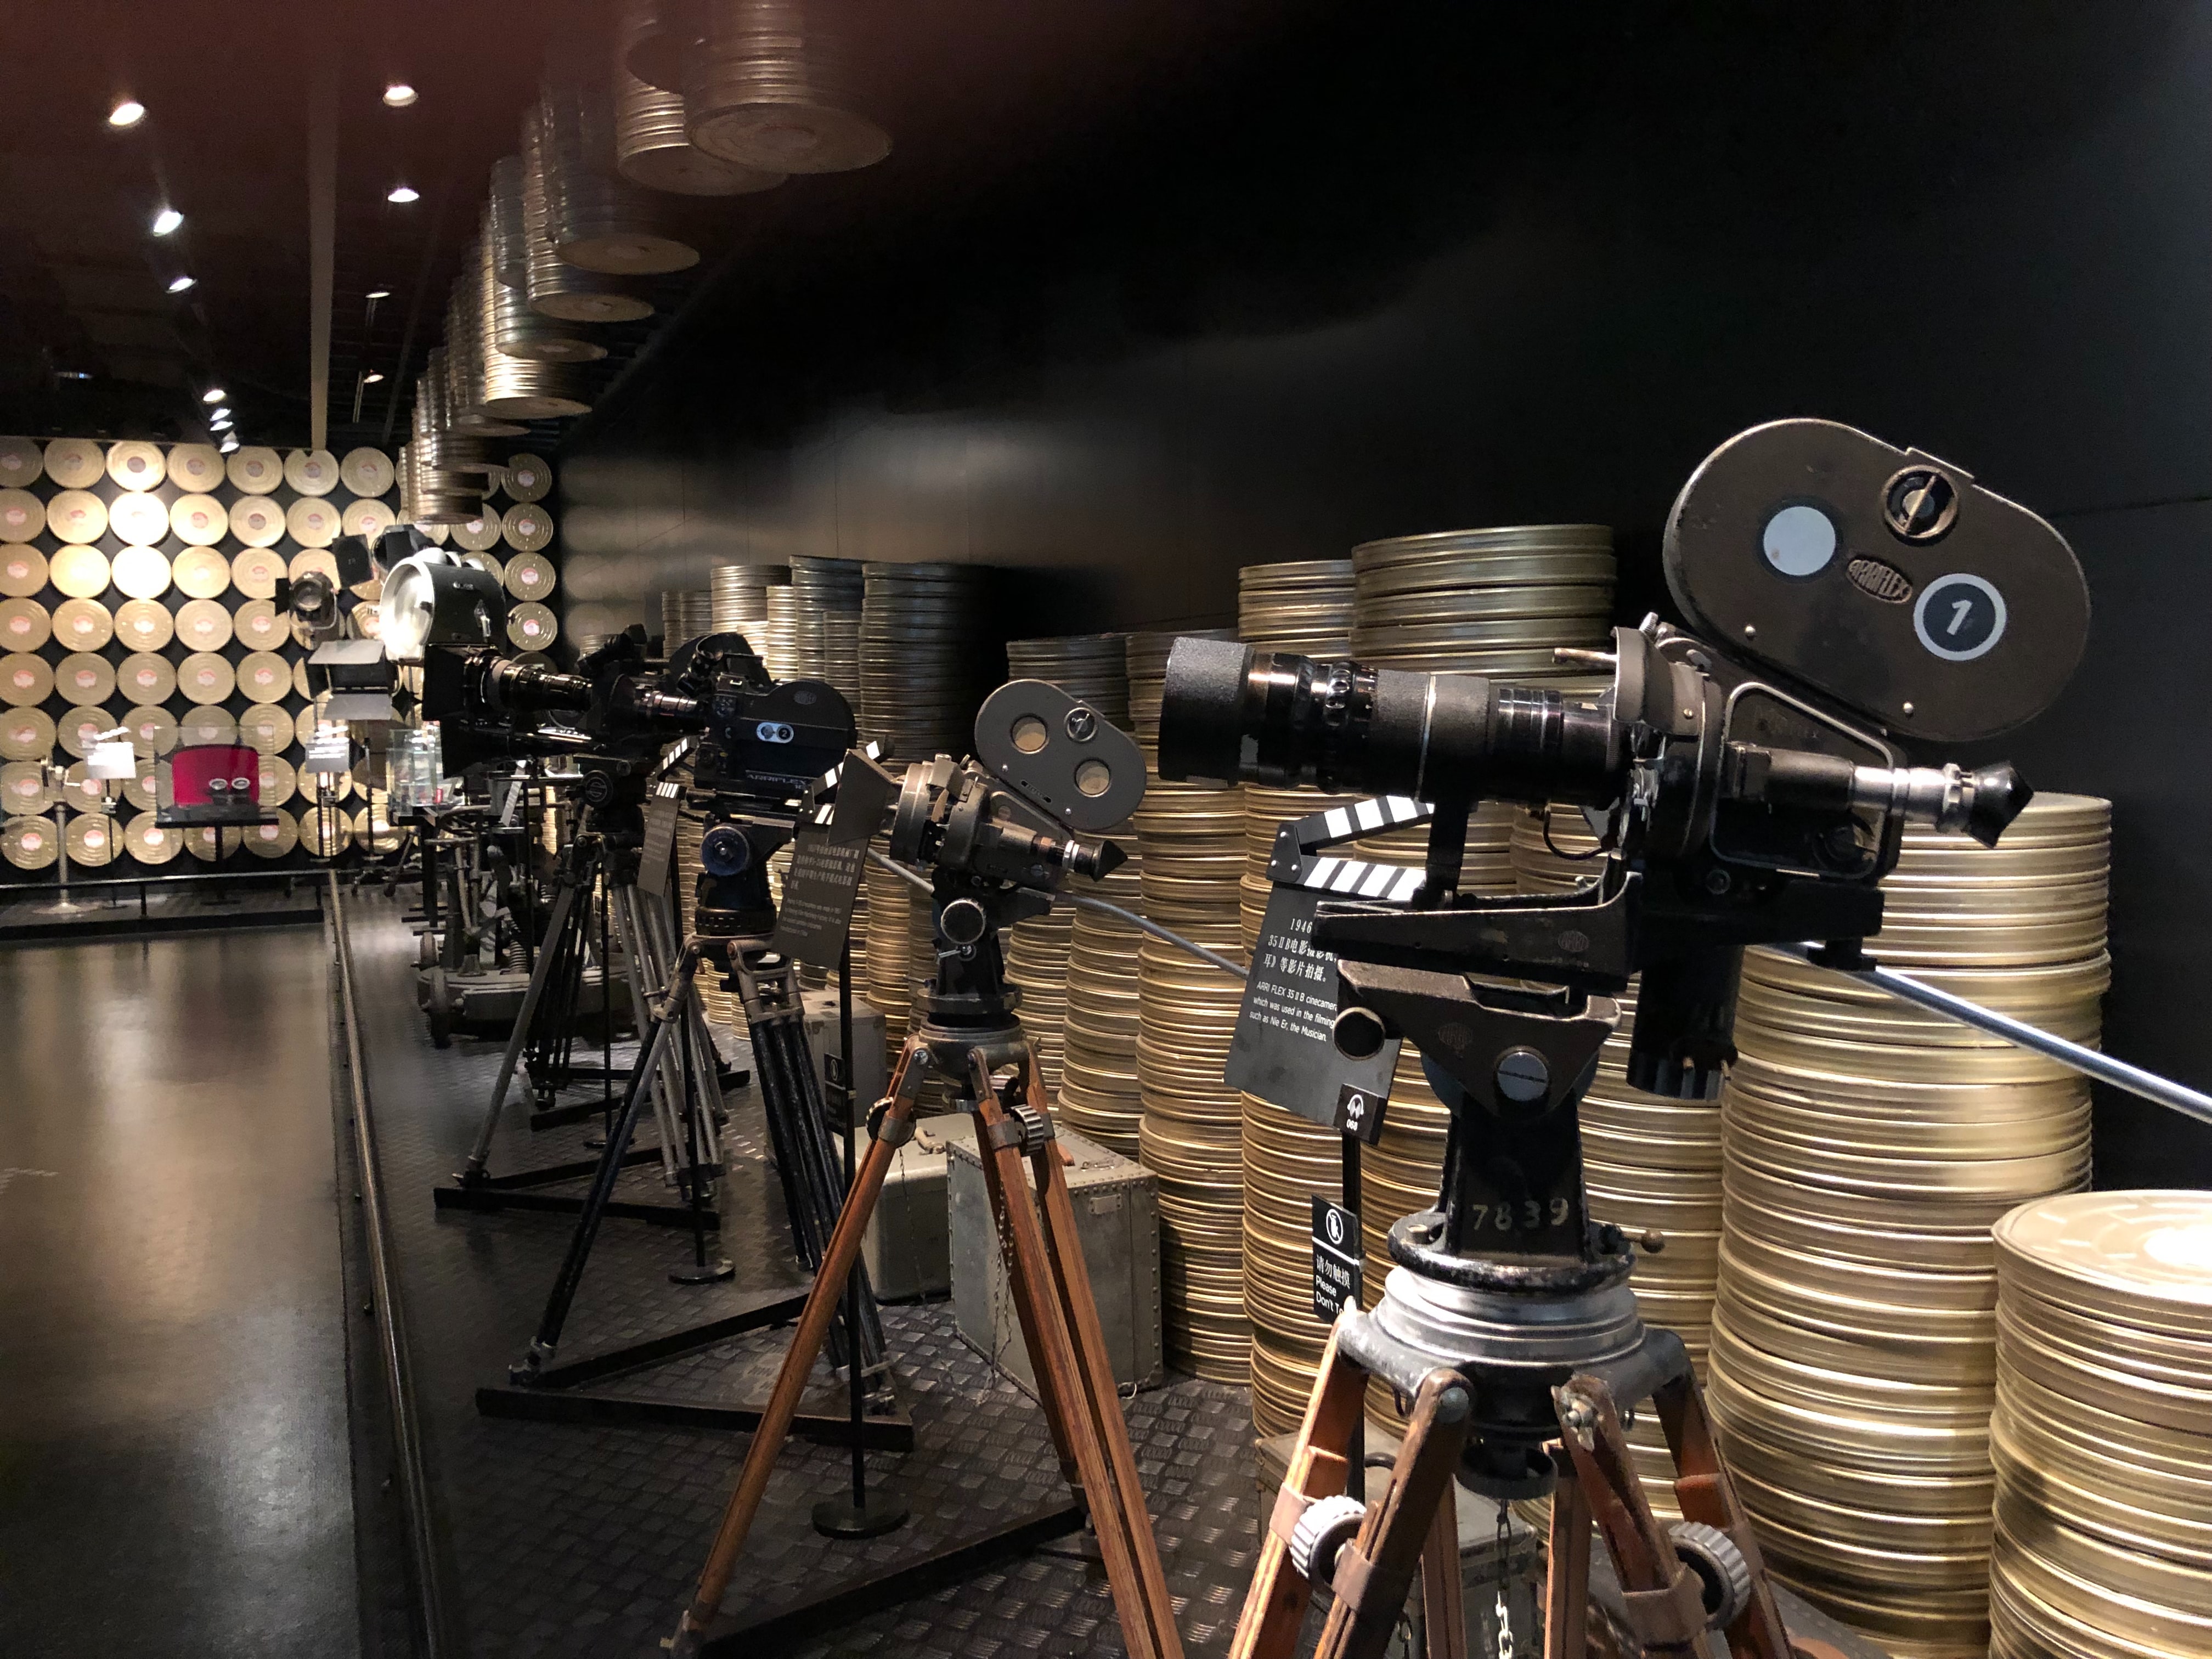 Black and silver cameras with film reels